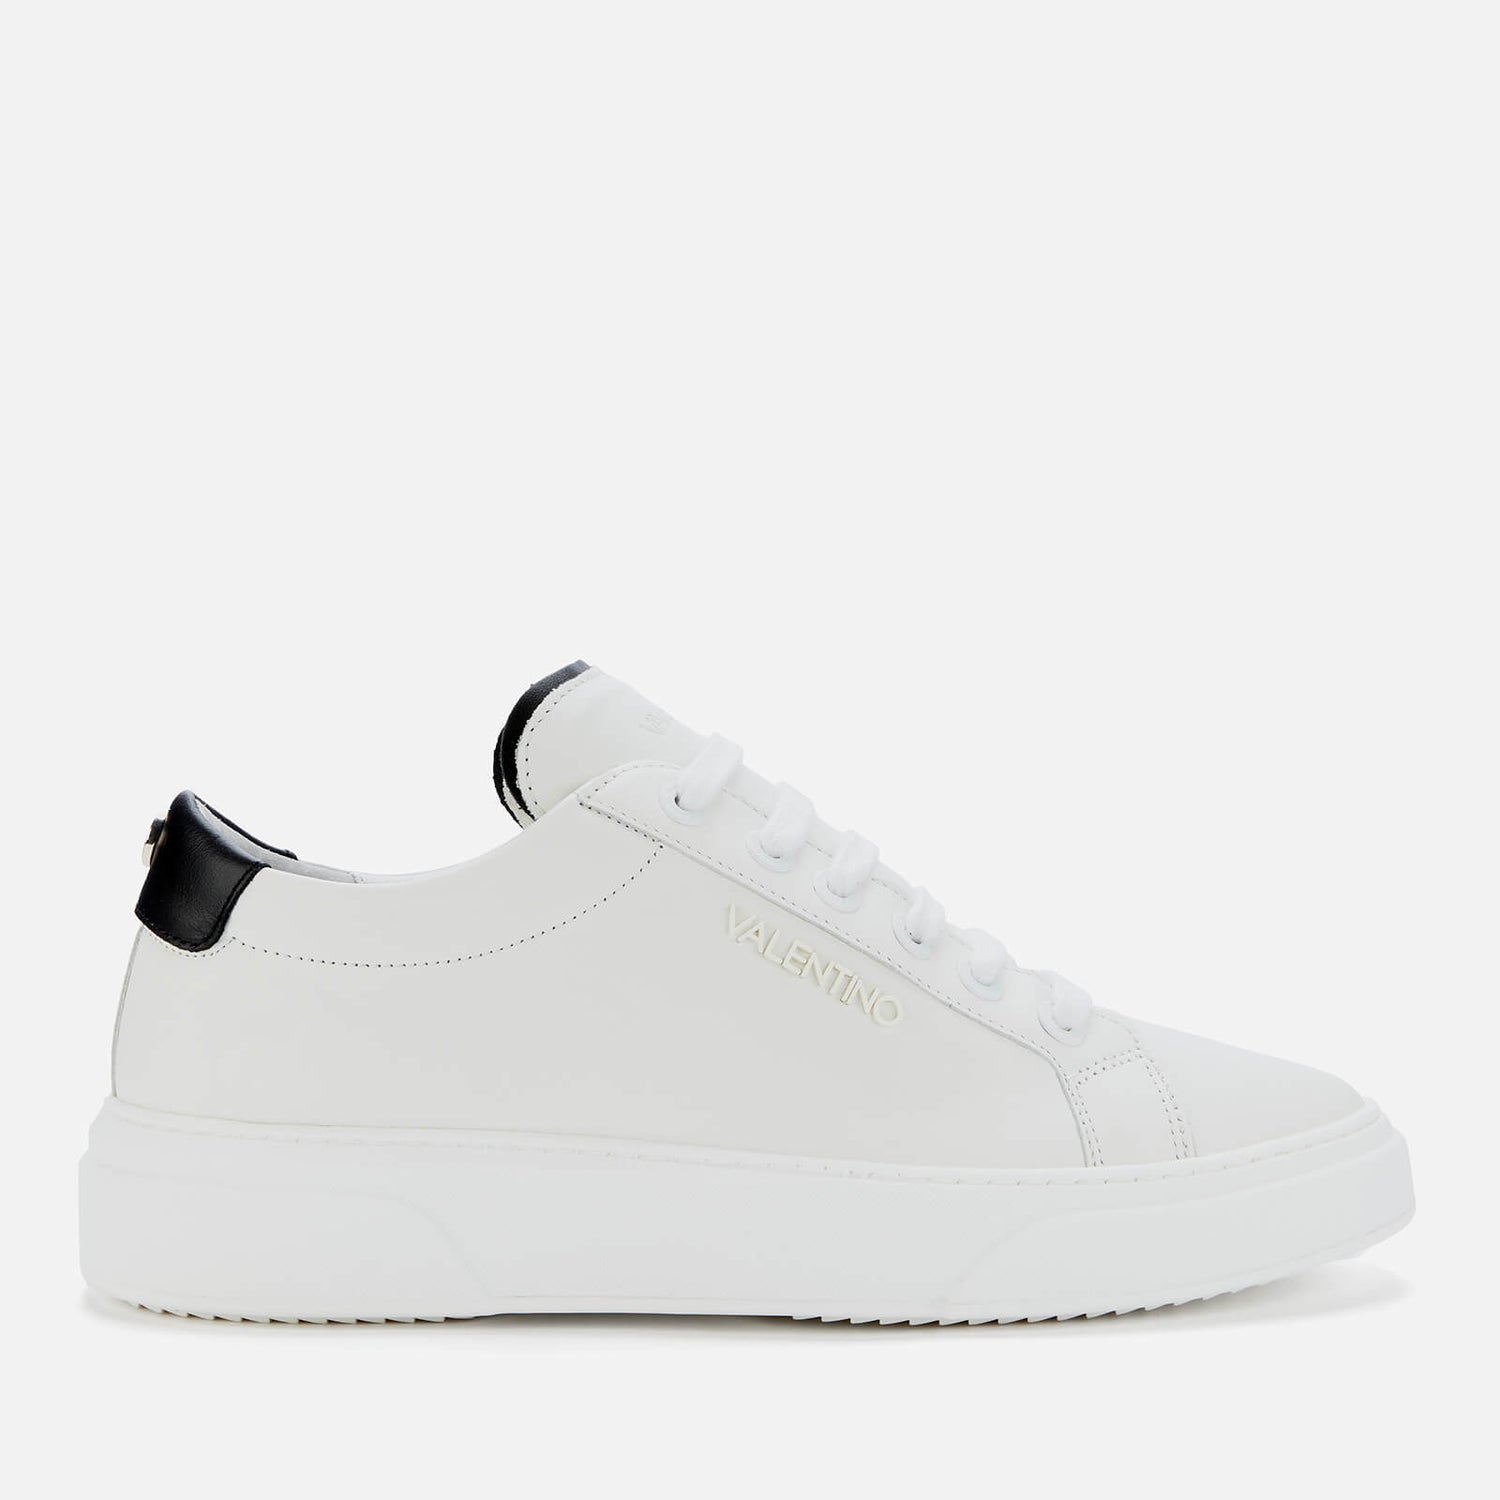 Valentino Men's Leather Chunky Trainers - White/Black